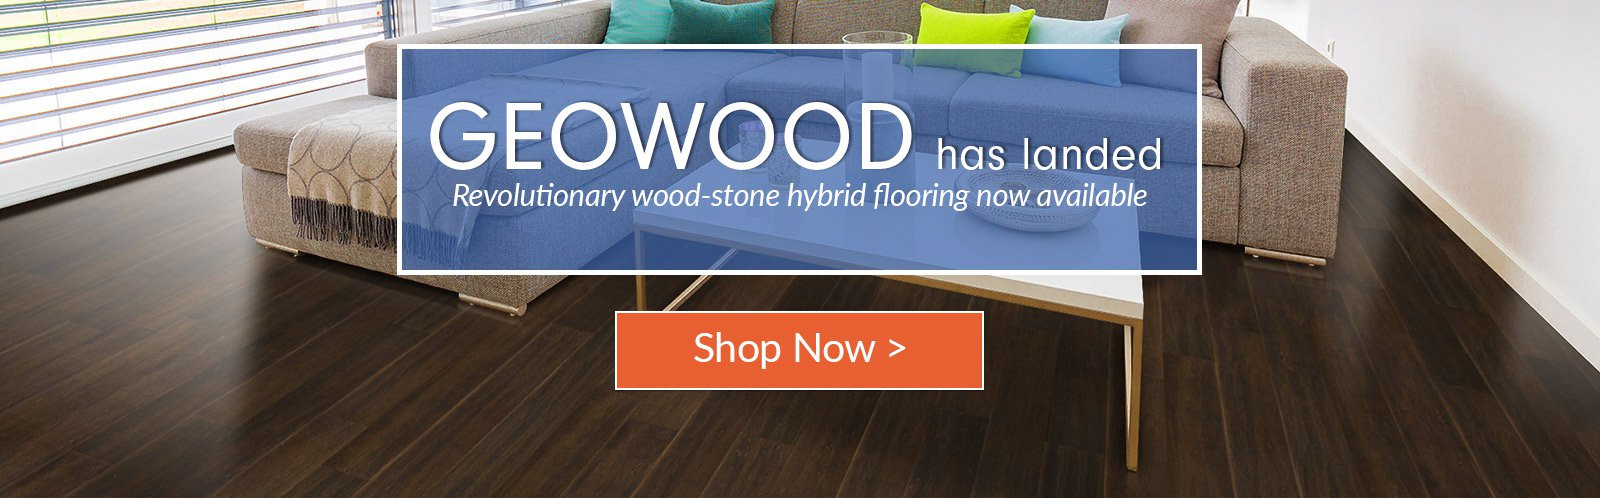 27 Stylish Discount Hardwood Flooring Los Angeles 2024 free download discount hardwood flooring los angeles of green building construction materials and home decor cali bamboo in geowood launch homepage slider